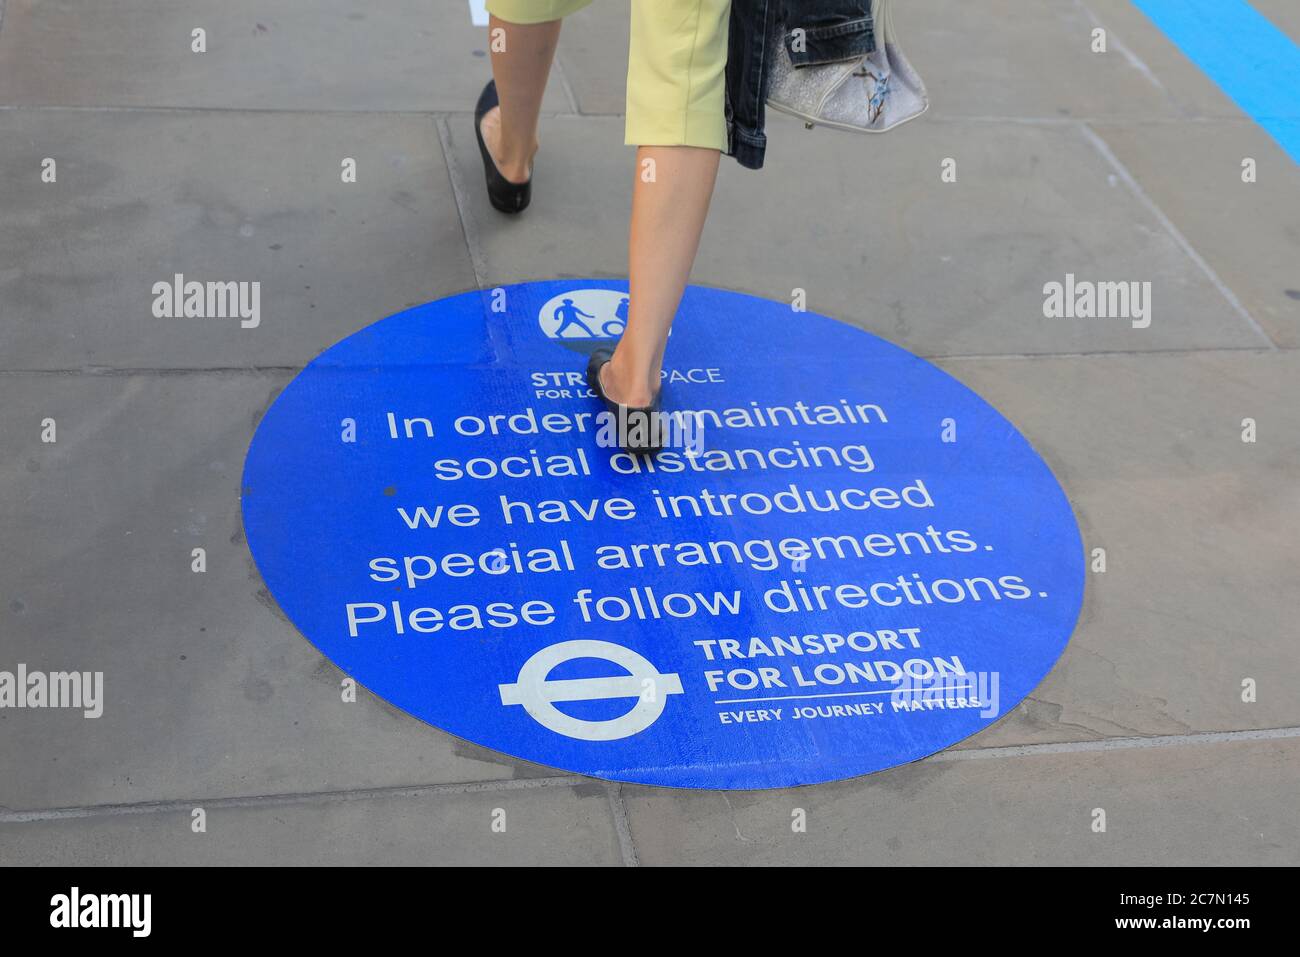 London, UK. 18th July, 2020. A woman walks across a sign on London Bridge reminding people of social distancing rules. Central London appeared to get busier today with more people leaving their homes to enjoy the sunny weather. Social distancing rules appeared to be adhered to in most places, but some areas are already getting crowded. Credit: Imageplotter/Alamy Live News Stock Photo